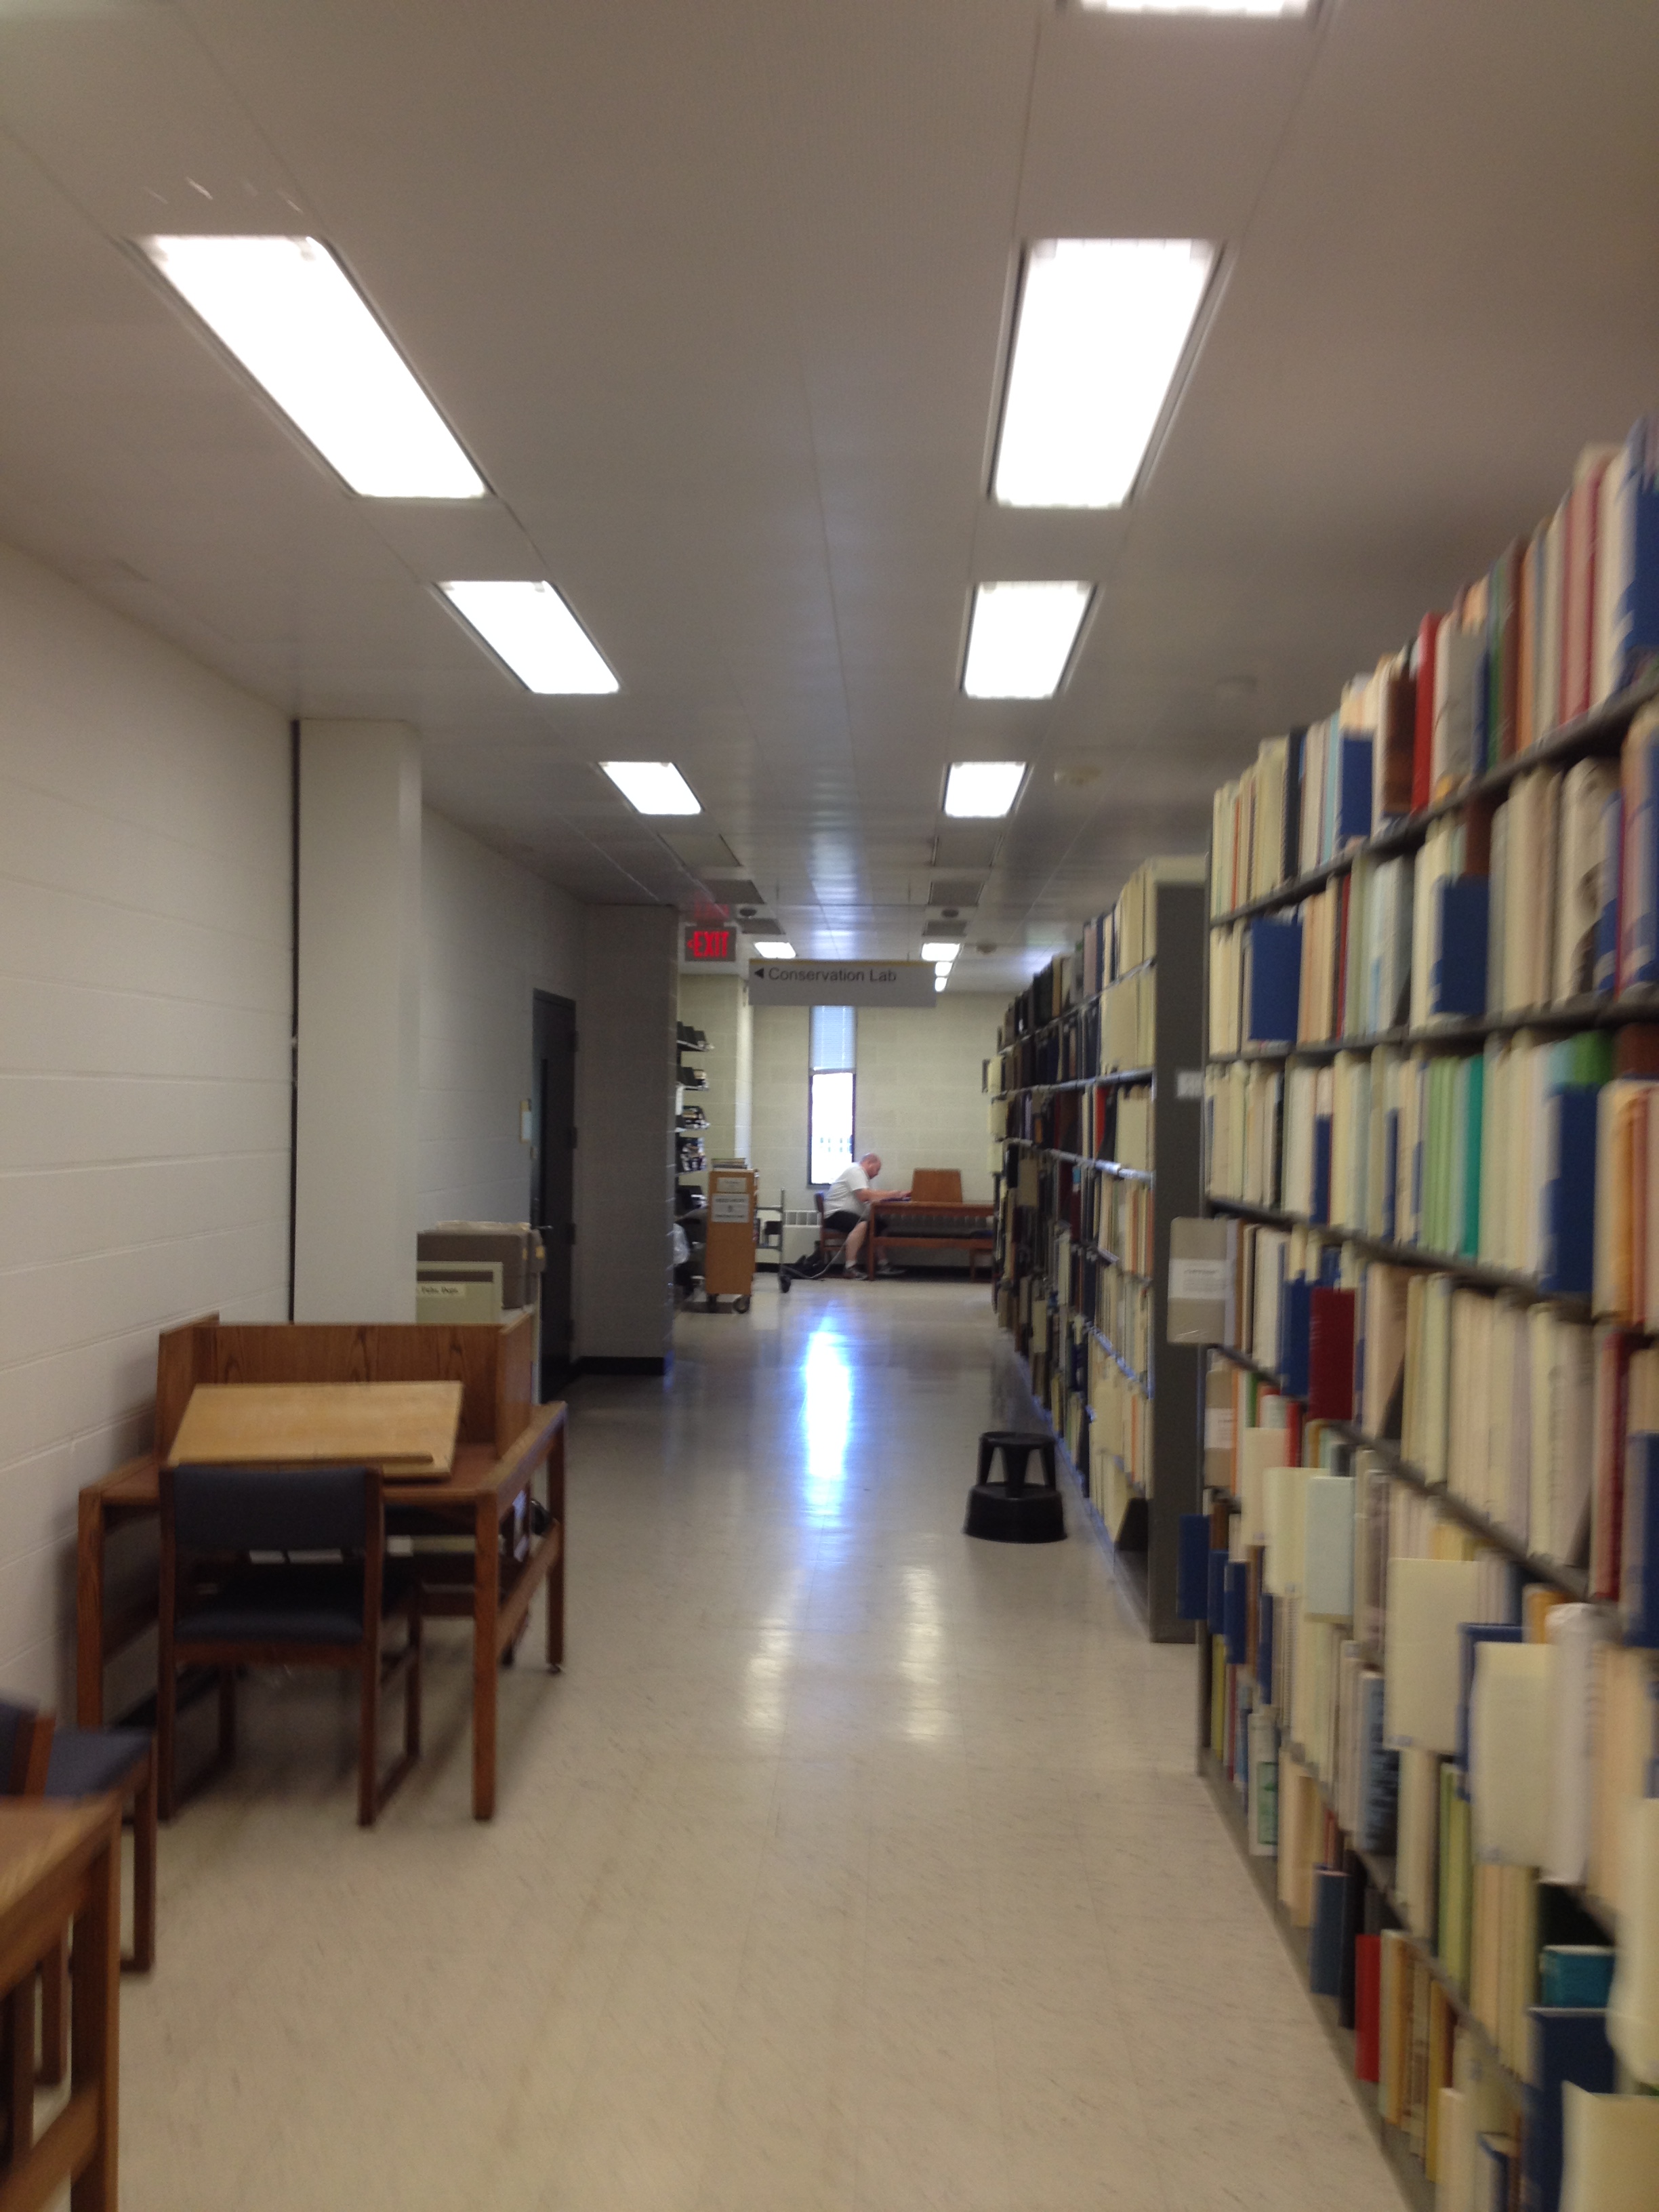 The Conservation lab at the University of Iowa Library is tucked away in the Government Docs section on the 5th floor 